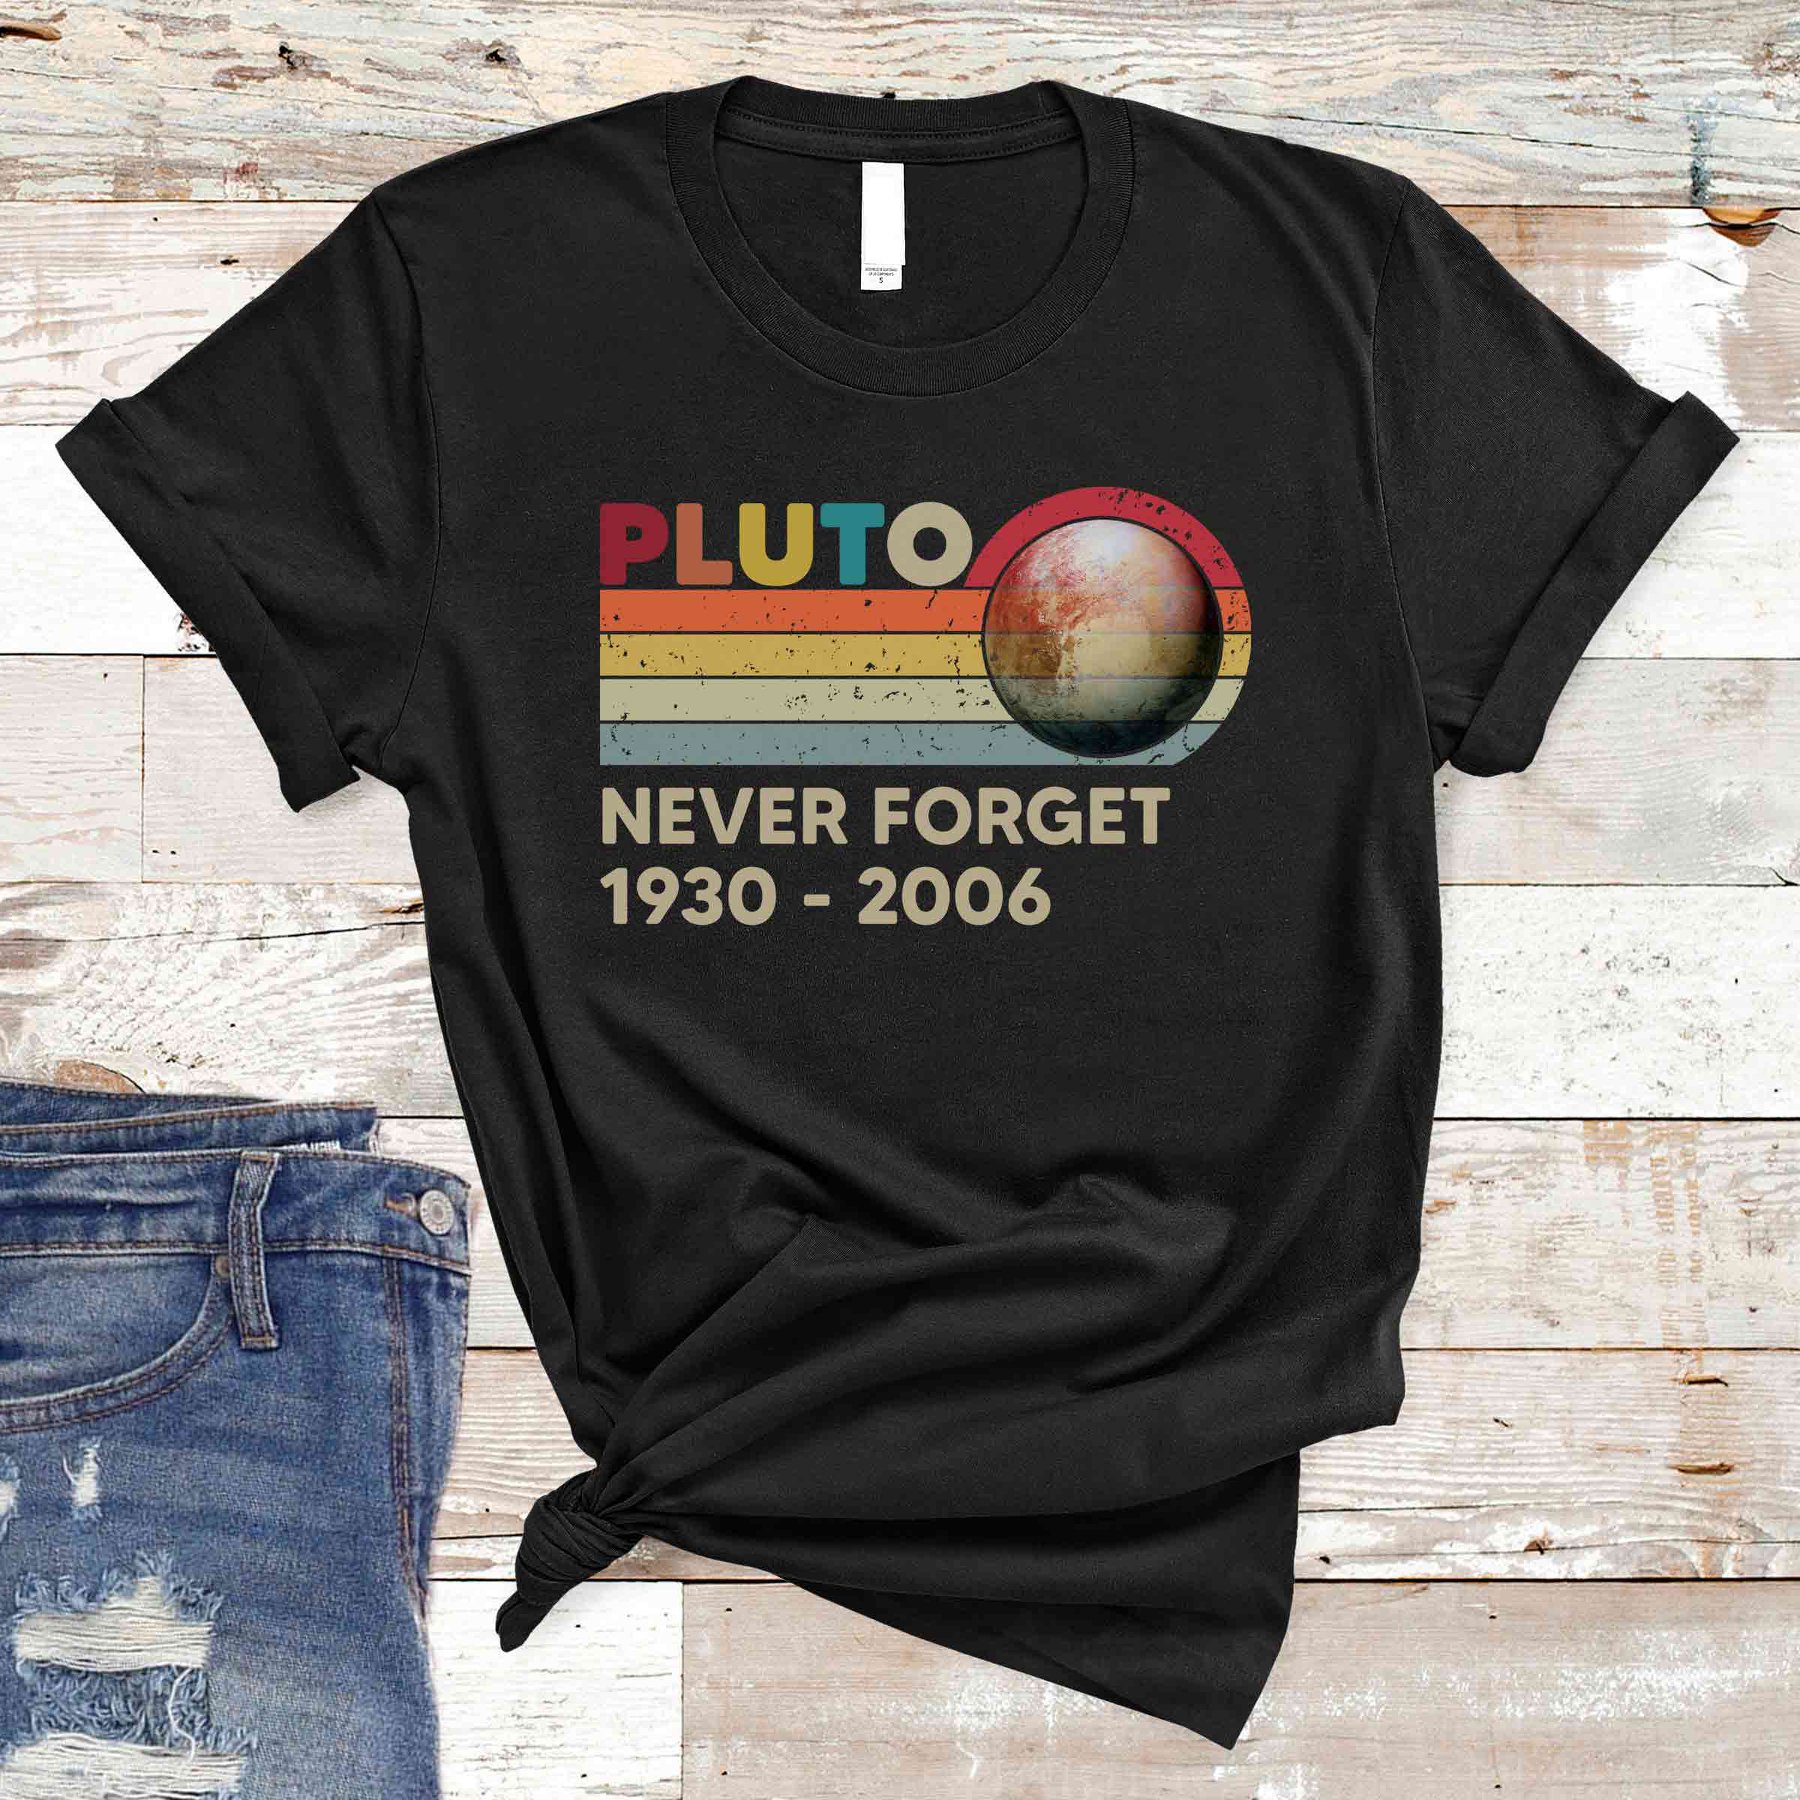 Pluto never forget 1930 - 2006 Pluto planet